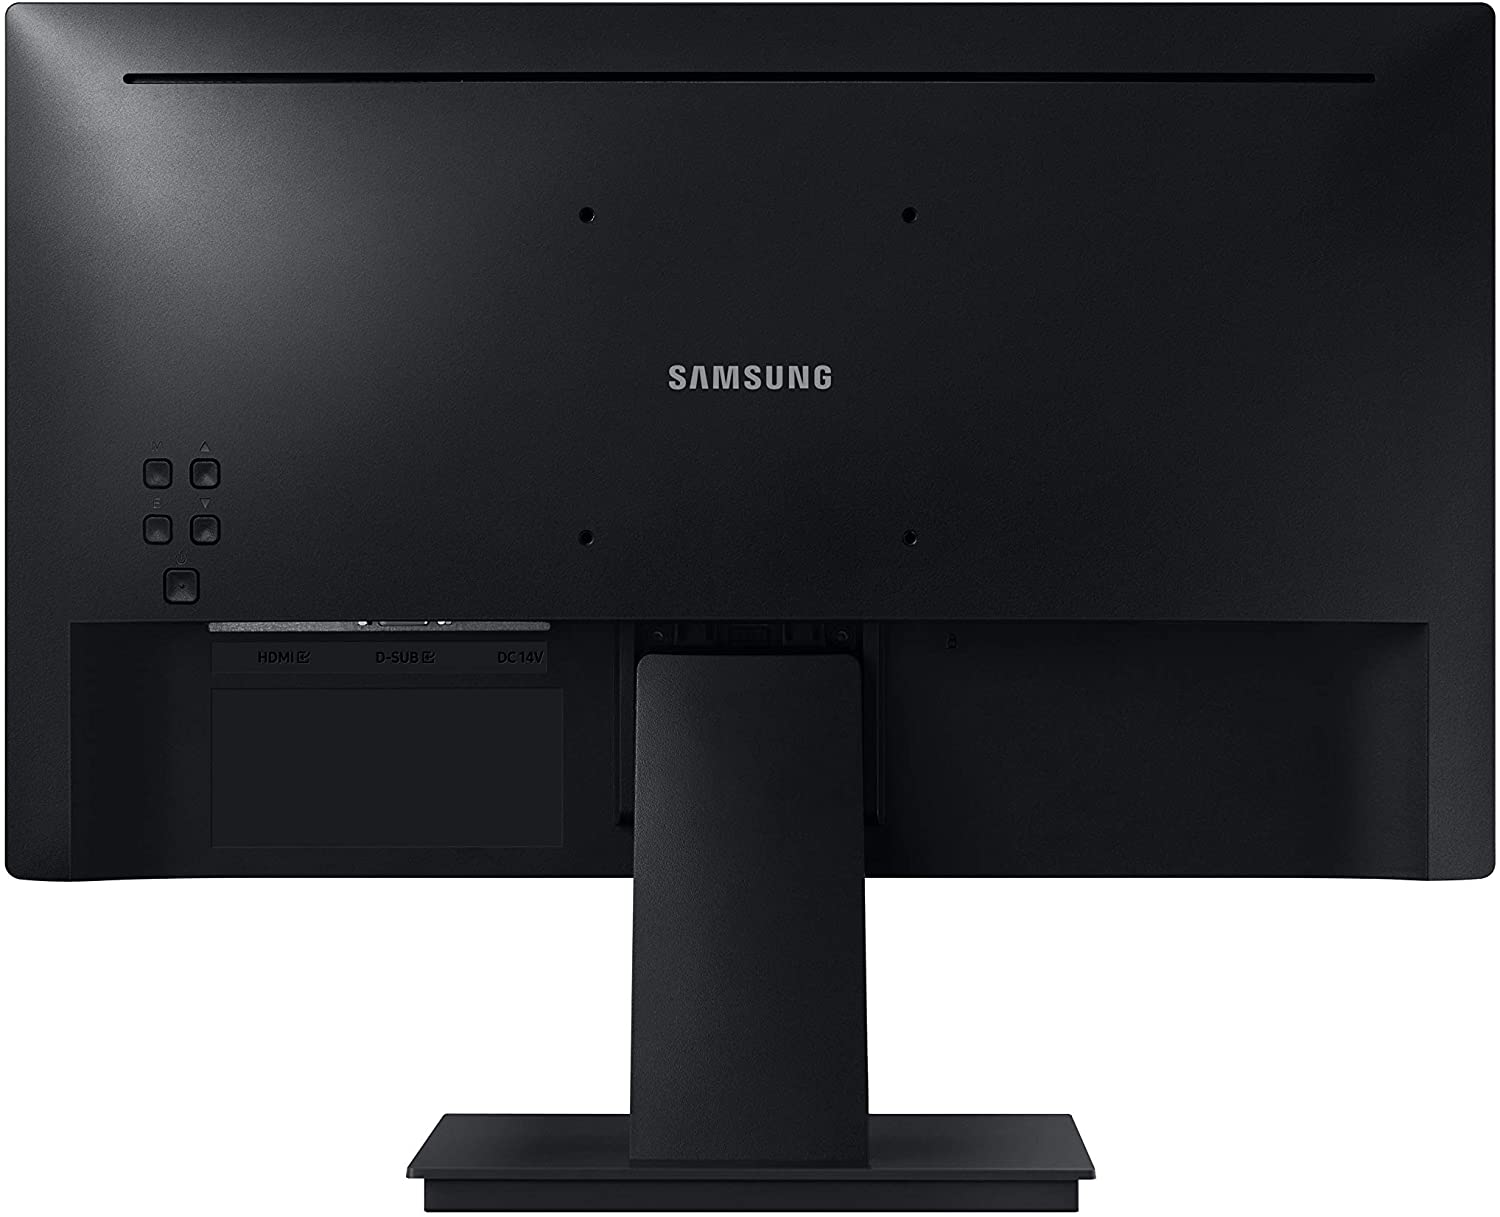 Samsung LS24A310NHNXZA-RB 24" S31A Series 1920 x 1080 60Hz Monitor - Certified Refurbished